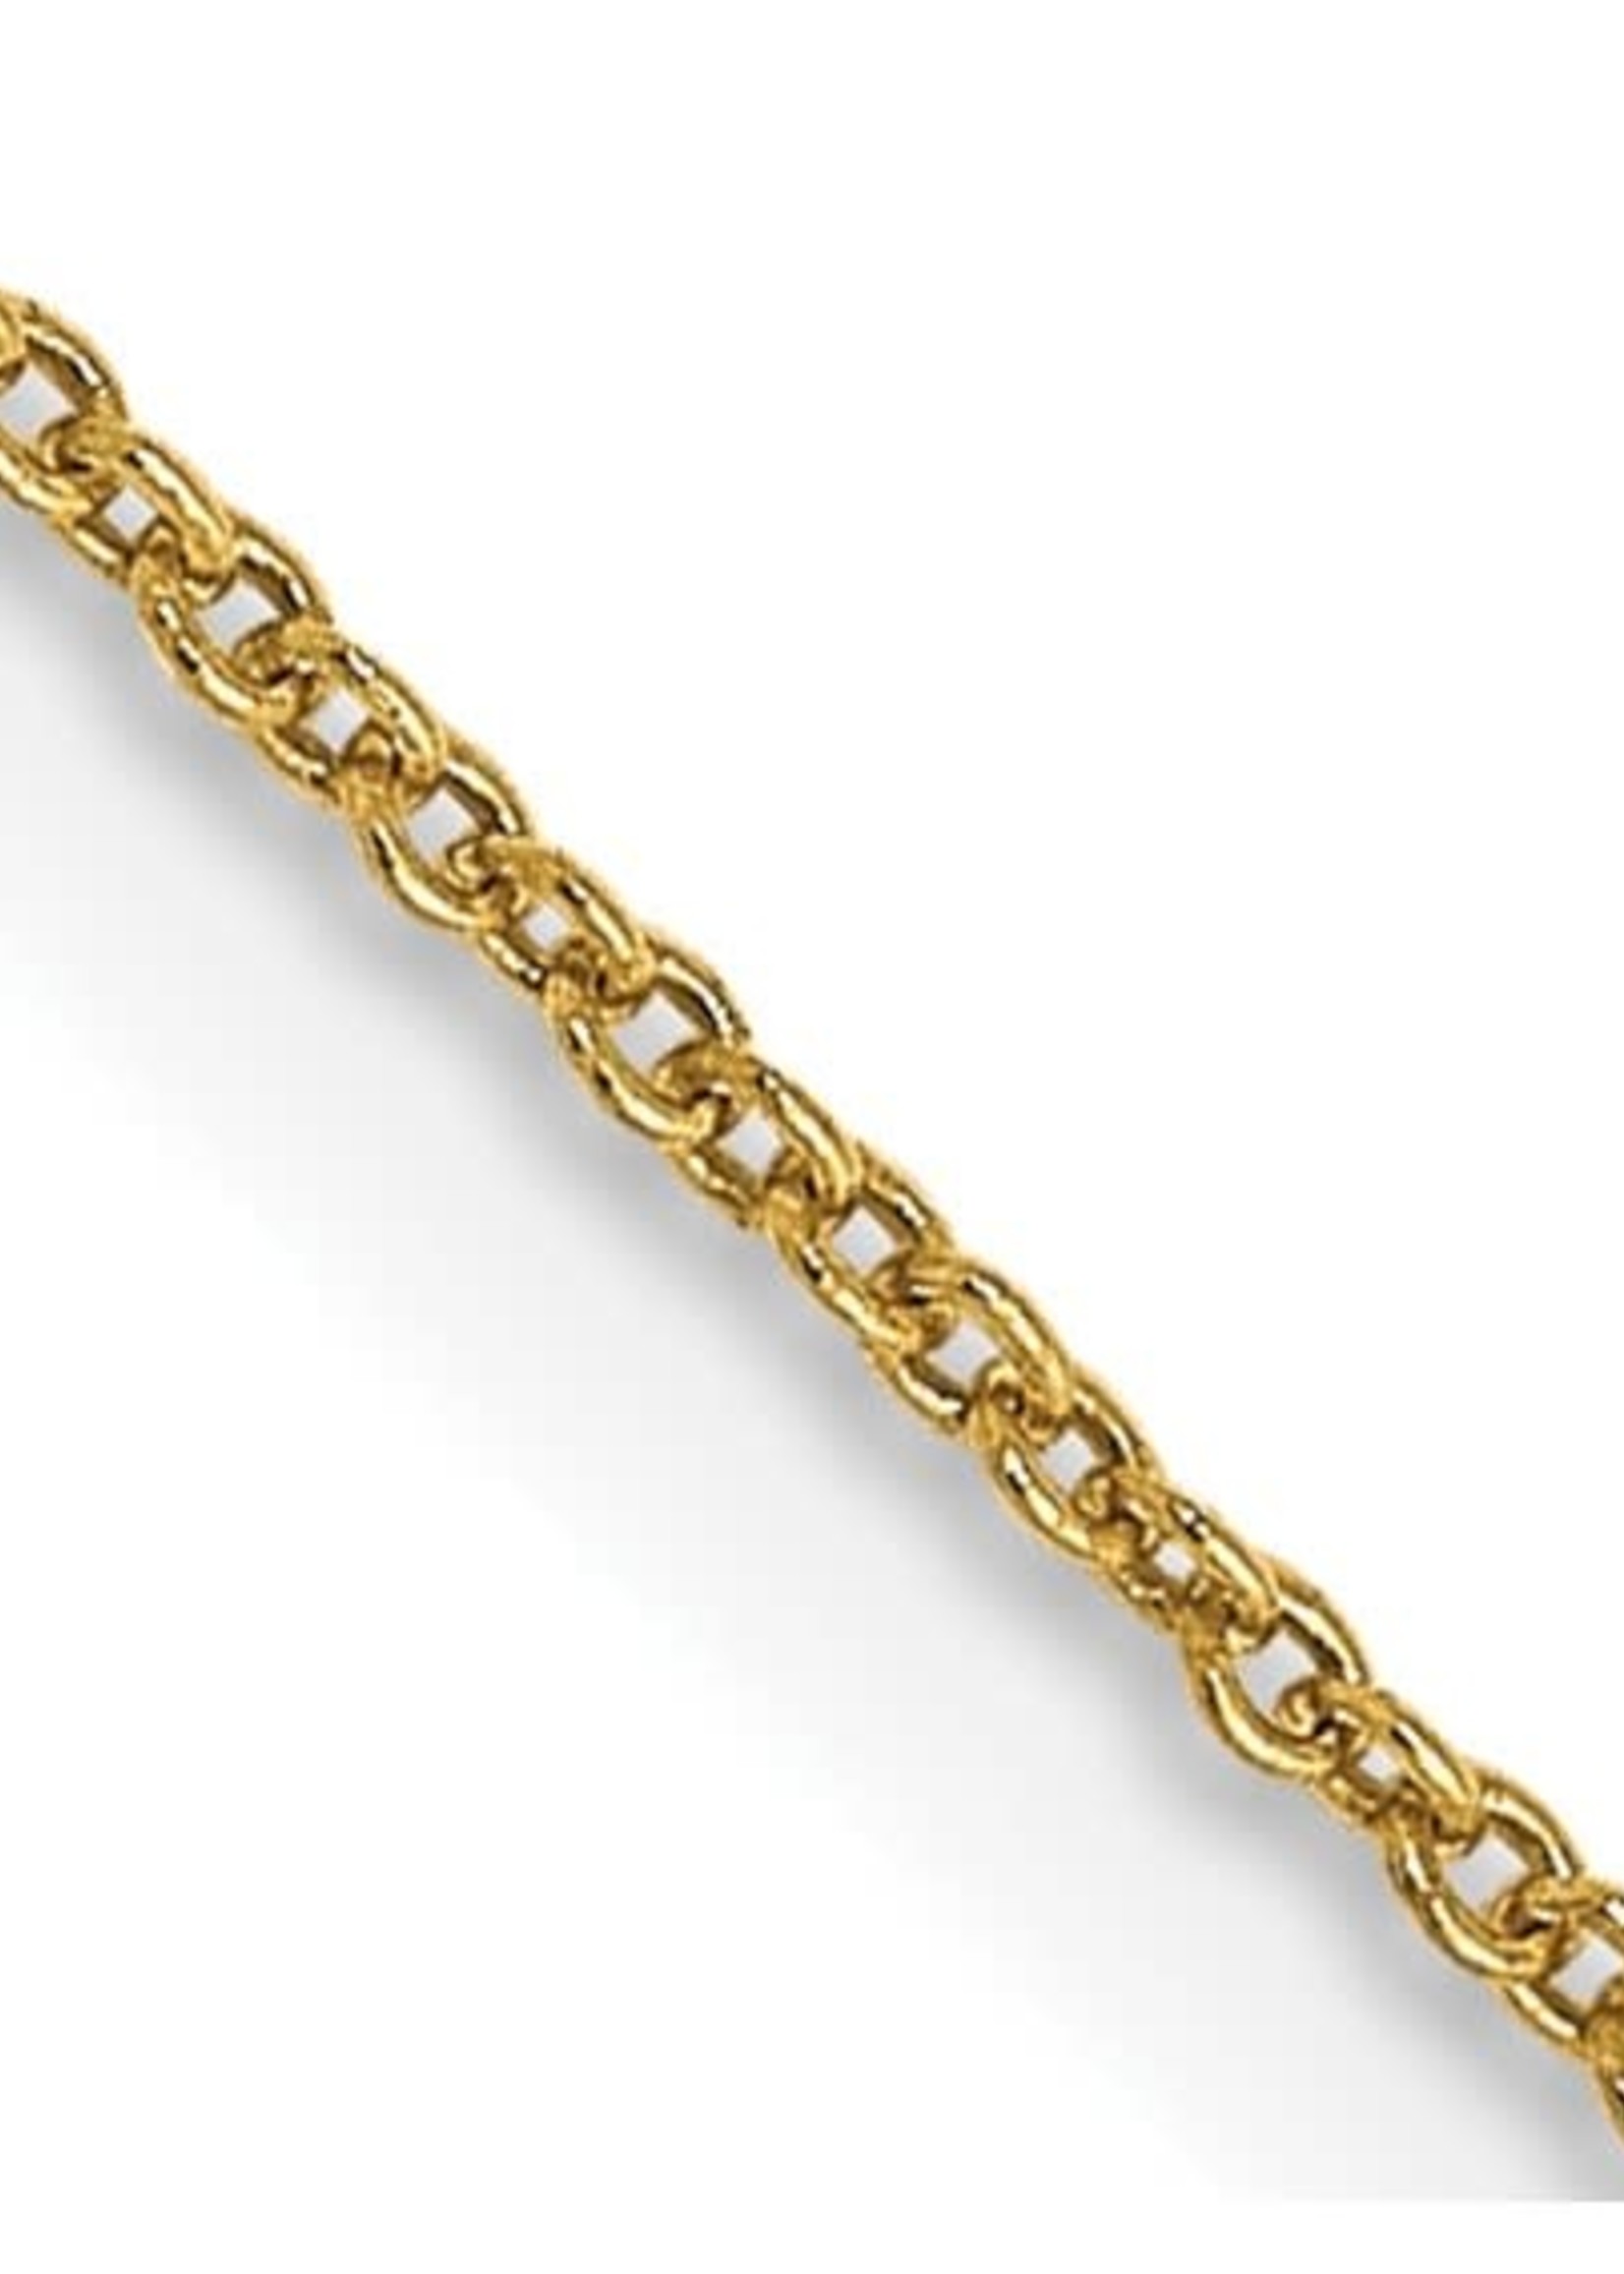 LESLIE'S 14K 18" 0.8mm Round Cable Chain 1g